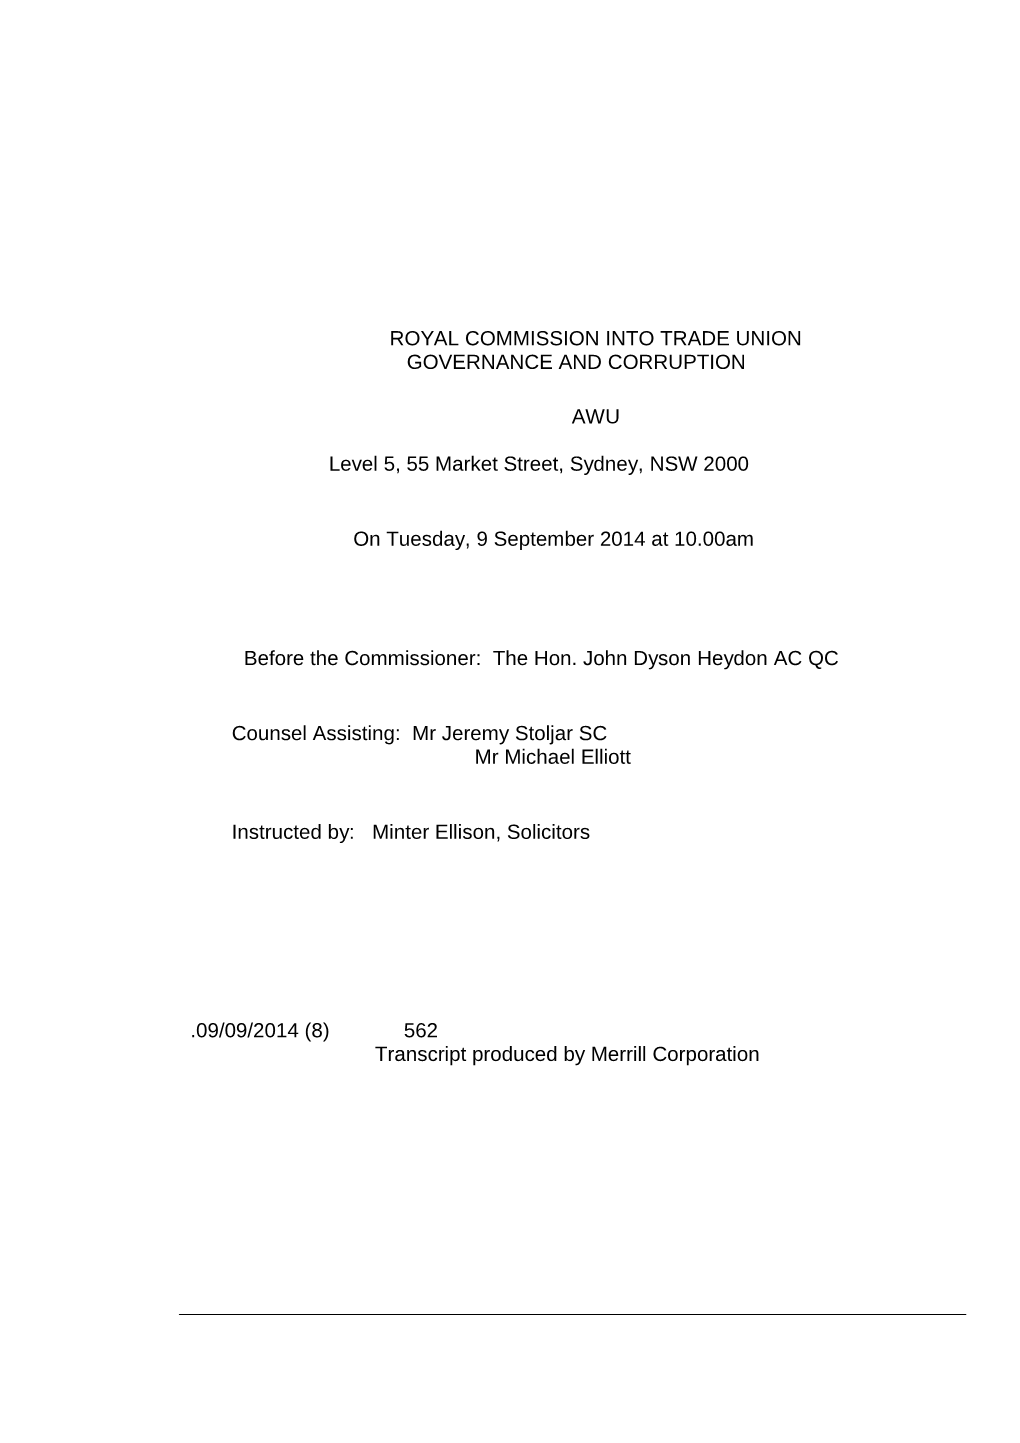 Royal Commission Into Trade Union Governance and Corruption AWU 9 September 2014 at 10.00Am